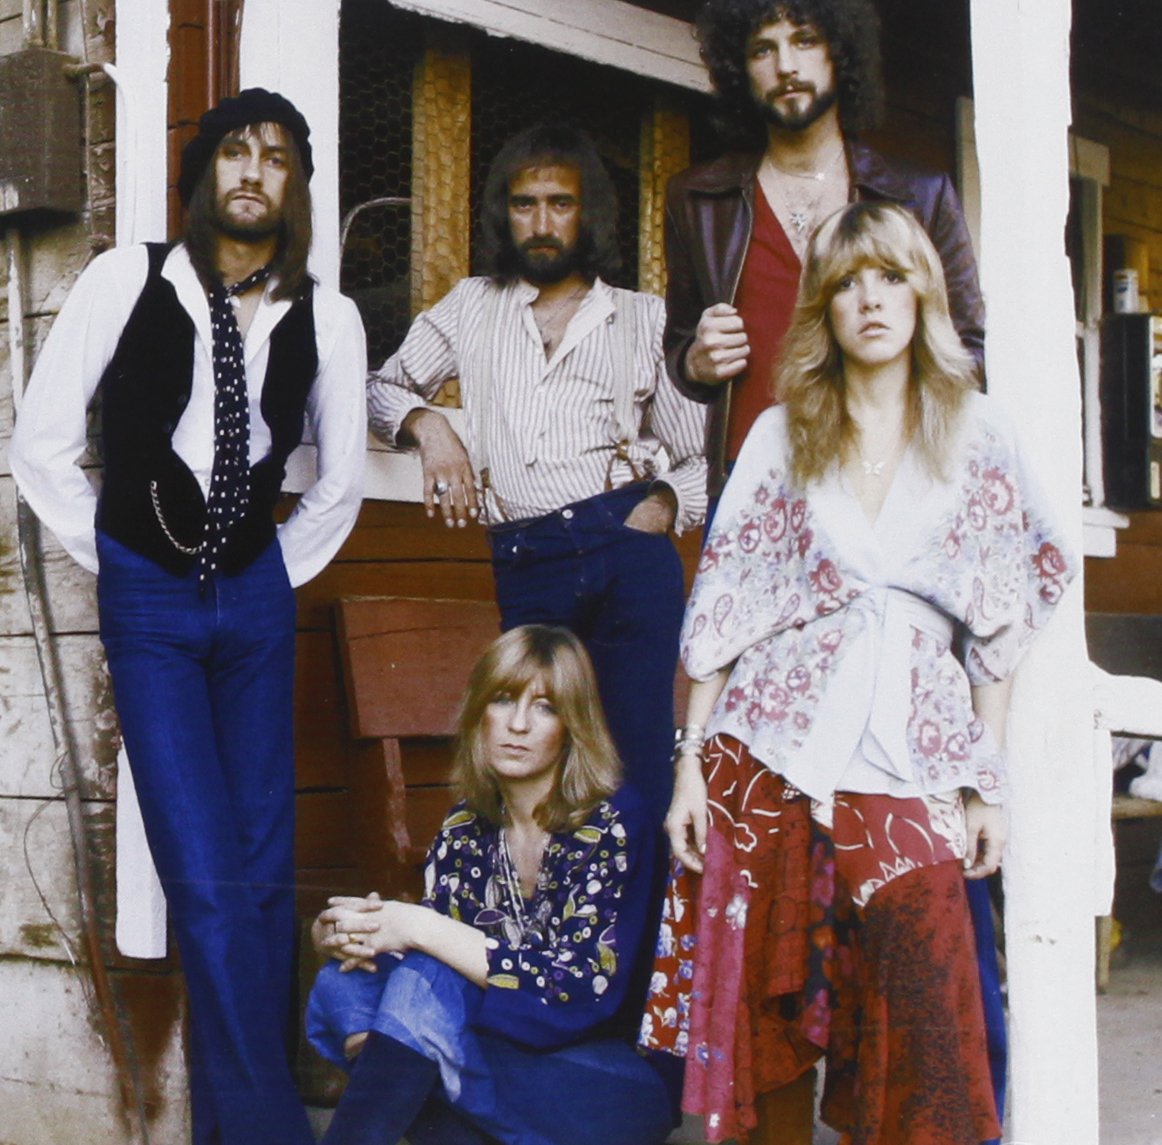 Art for Don't Stop by Fleetwood Mac